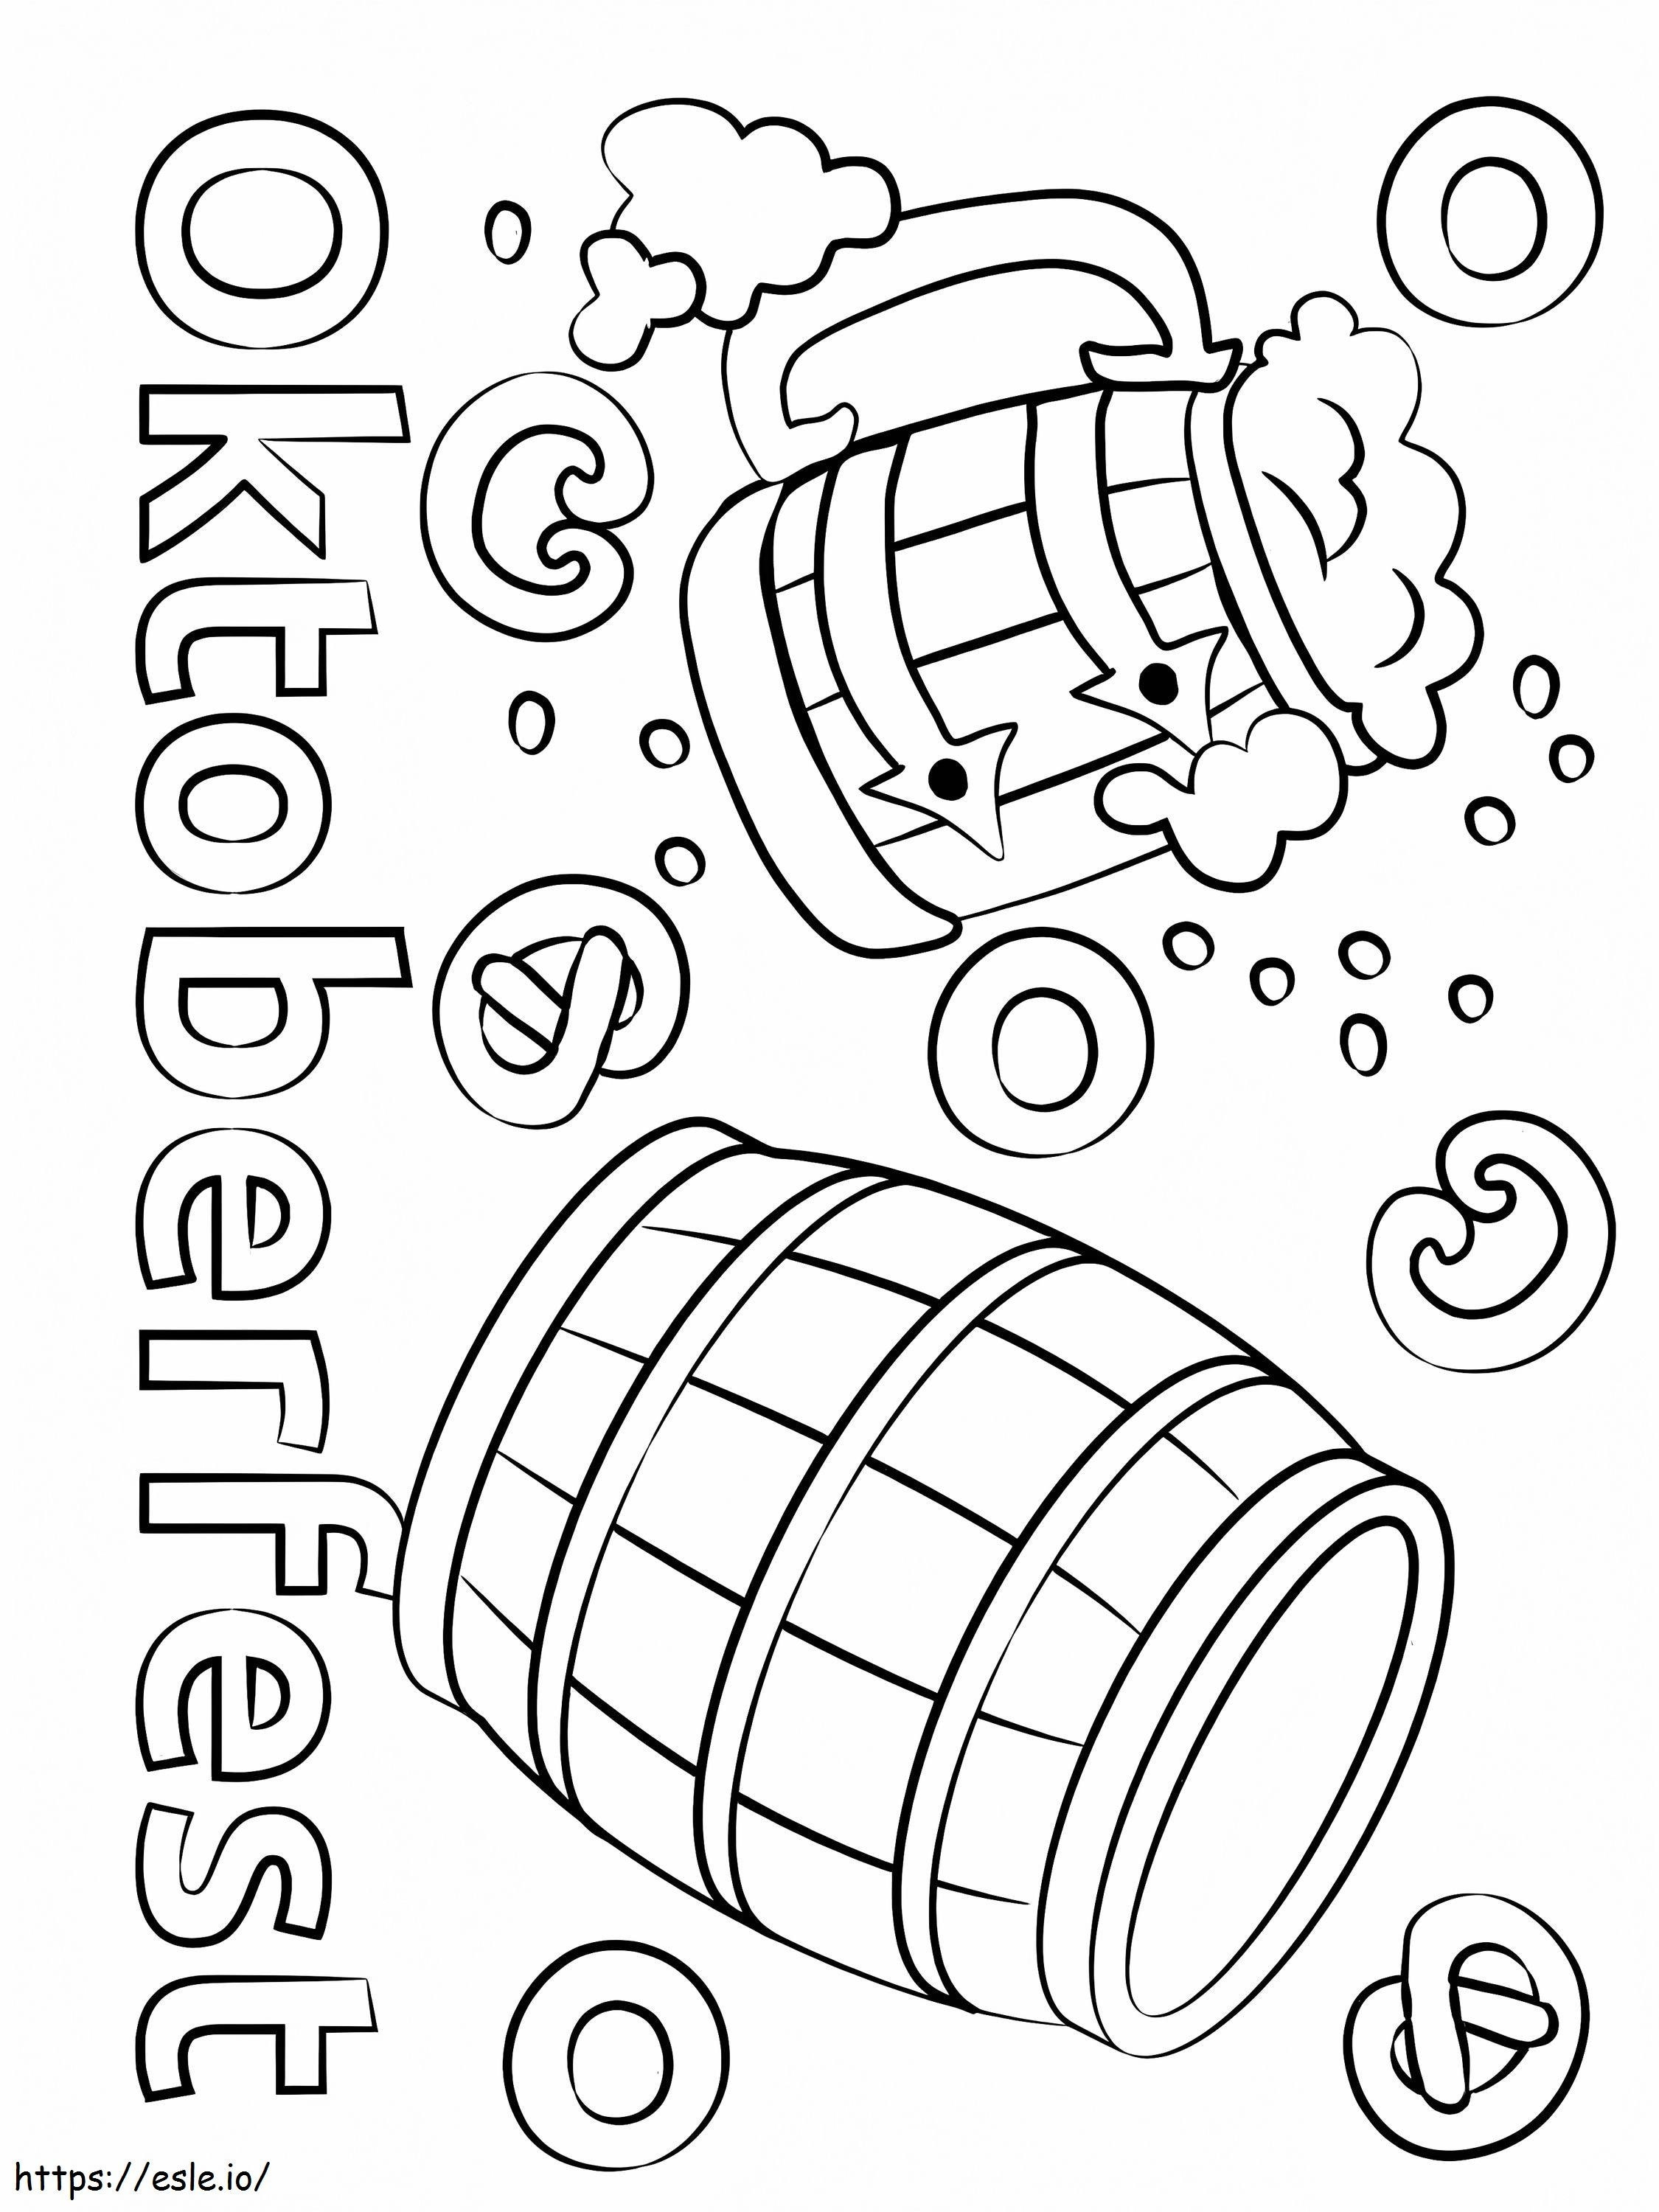 Oktoberfest 3 coloring page